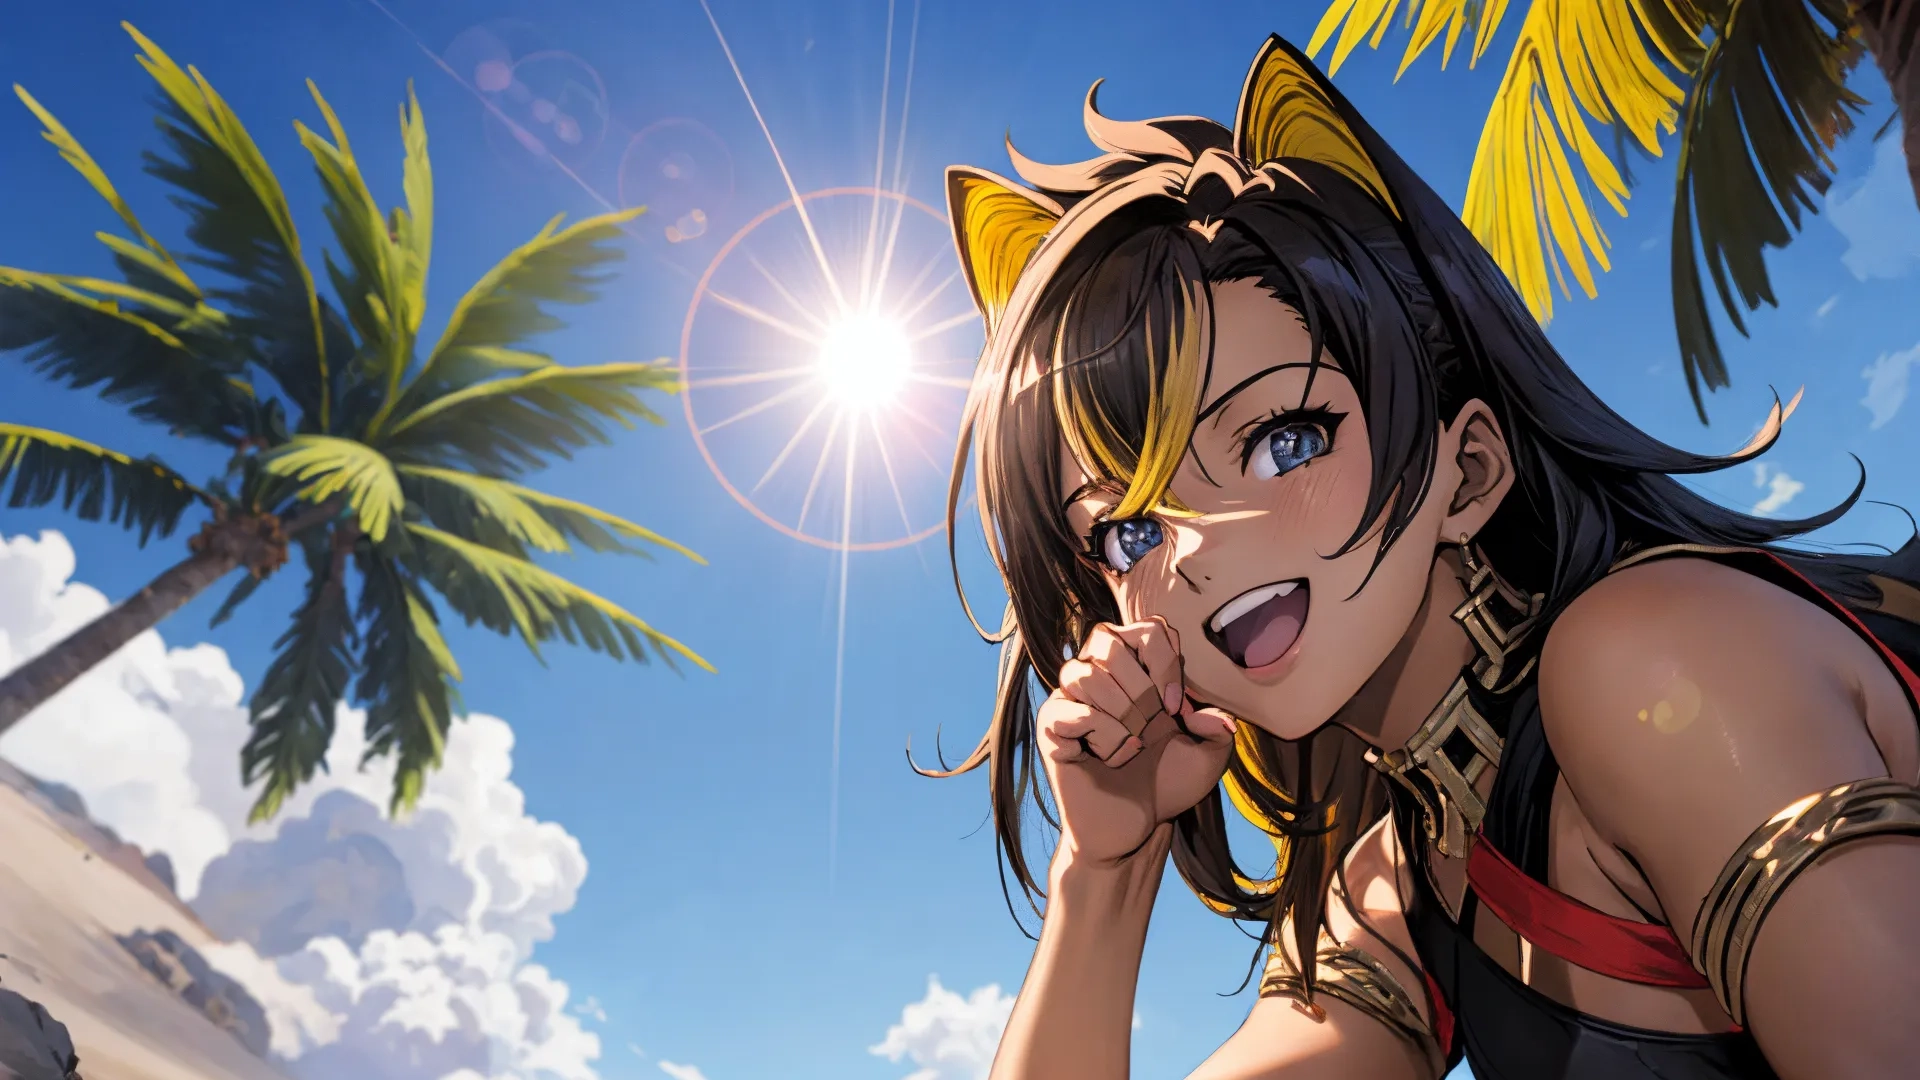 anime woman in a short shirt standing near palm trees with blue sky in background in the middle of her photograph on a sunny day in front of sun light
